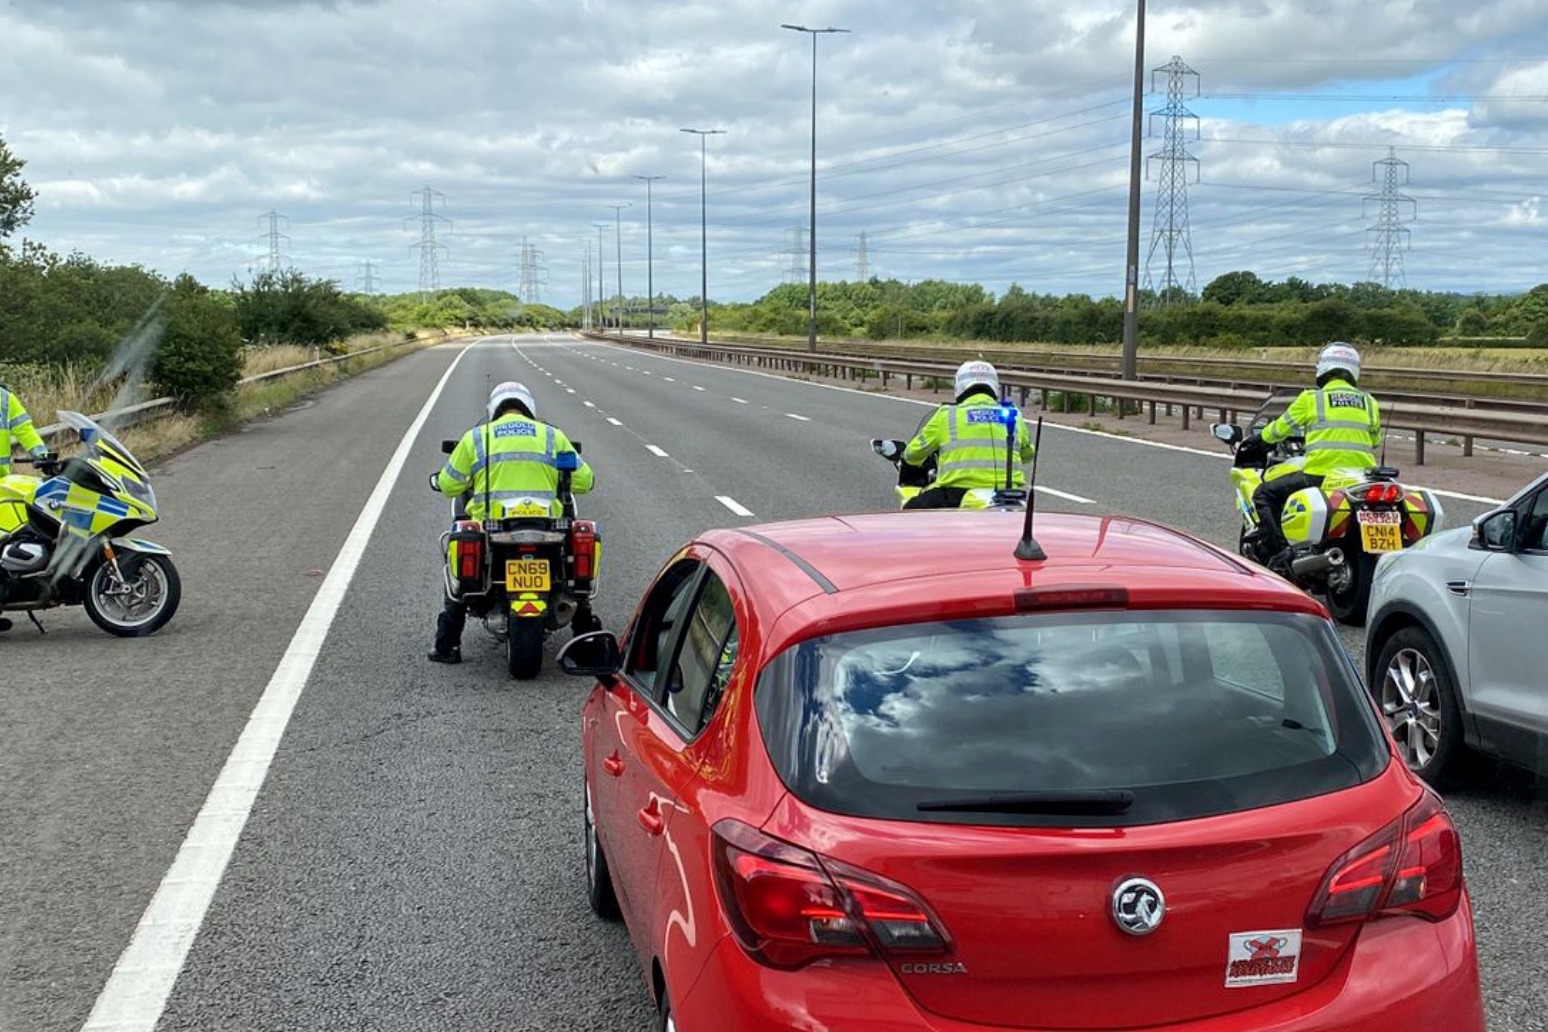 Twelve arrested during M4 fuel price protest for driving ‘too slow’ 